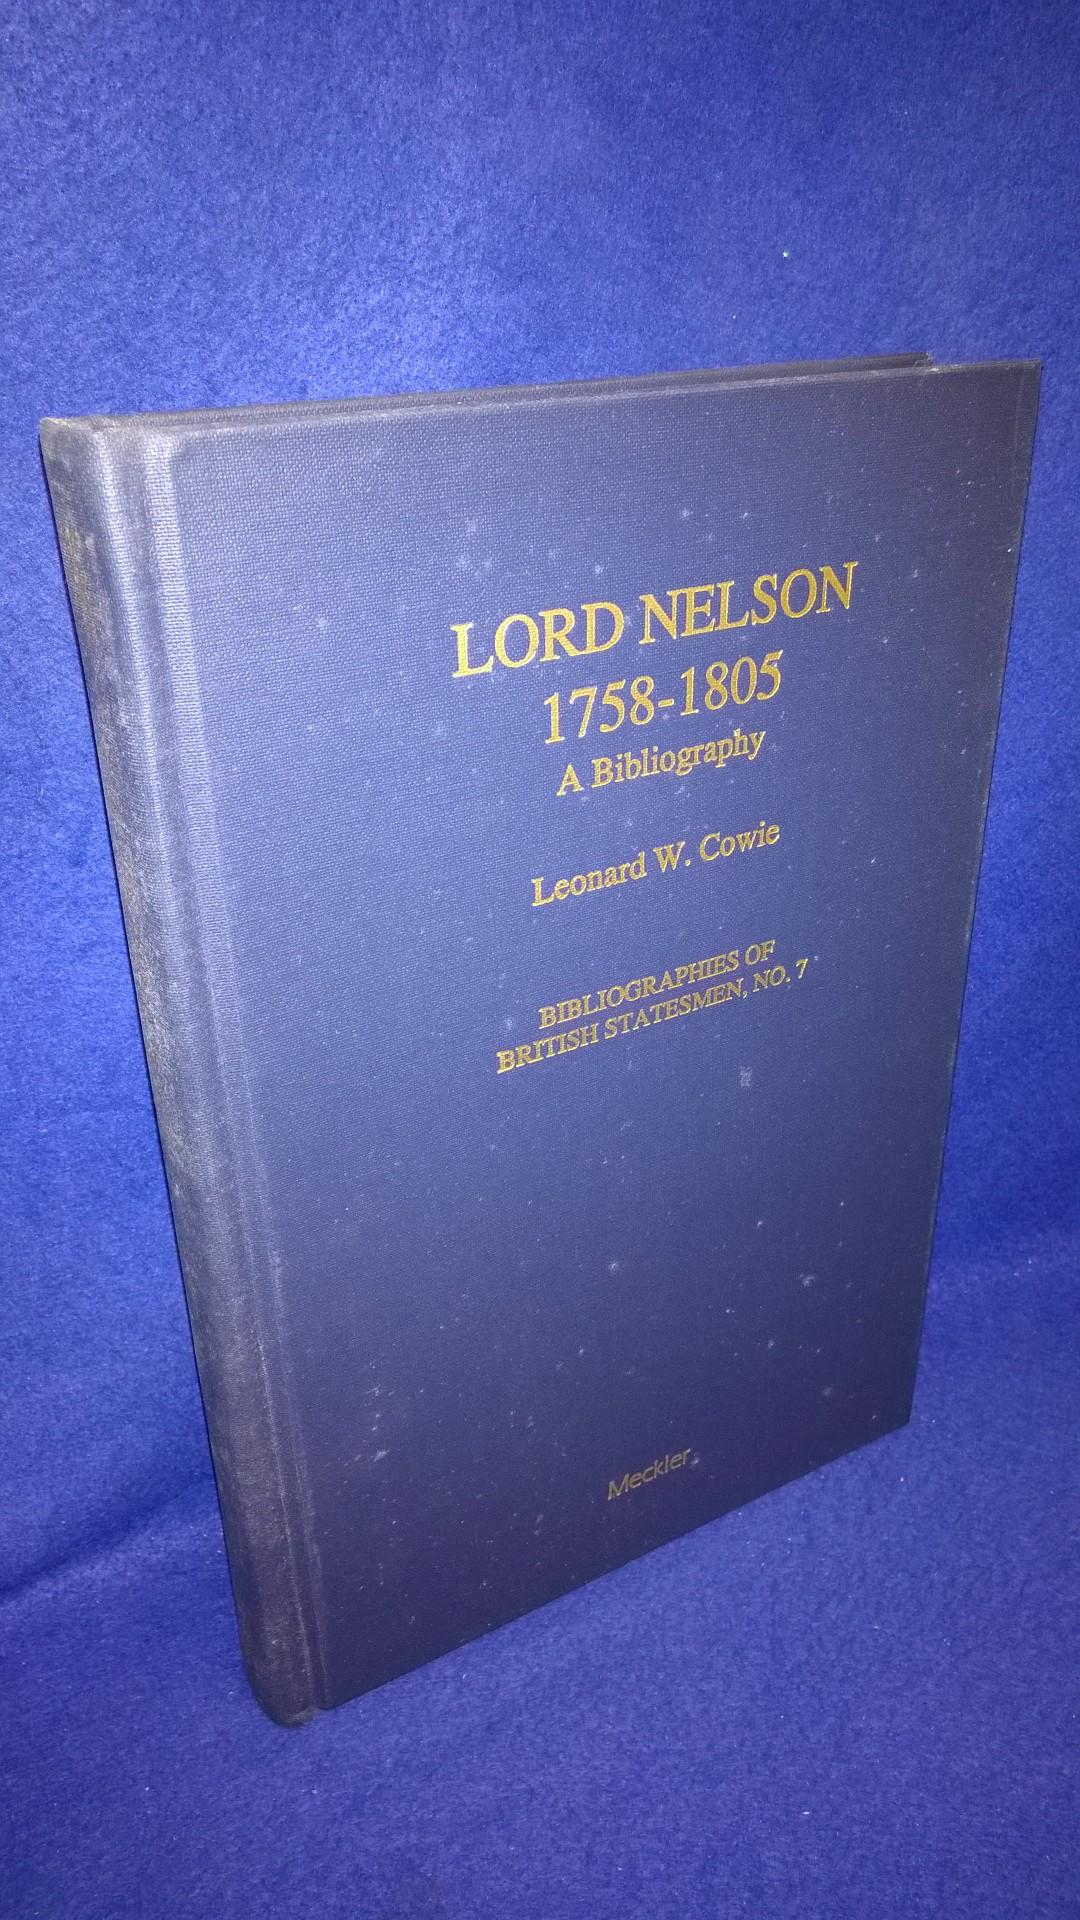 Lord Nelson 1758-1805. A Bibliography.